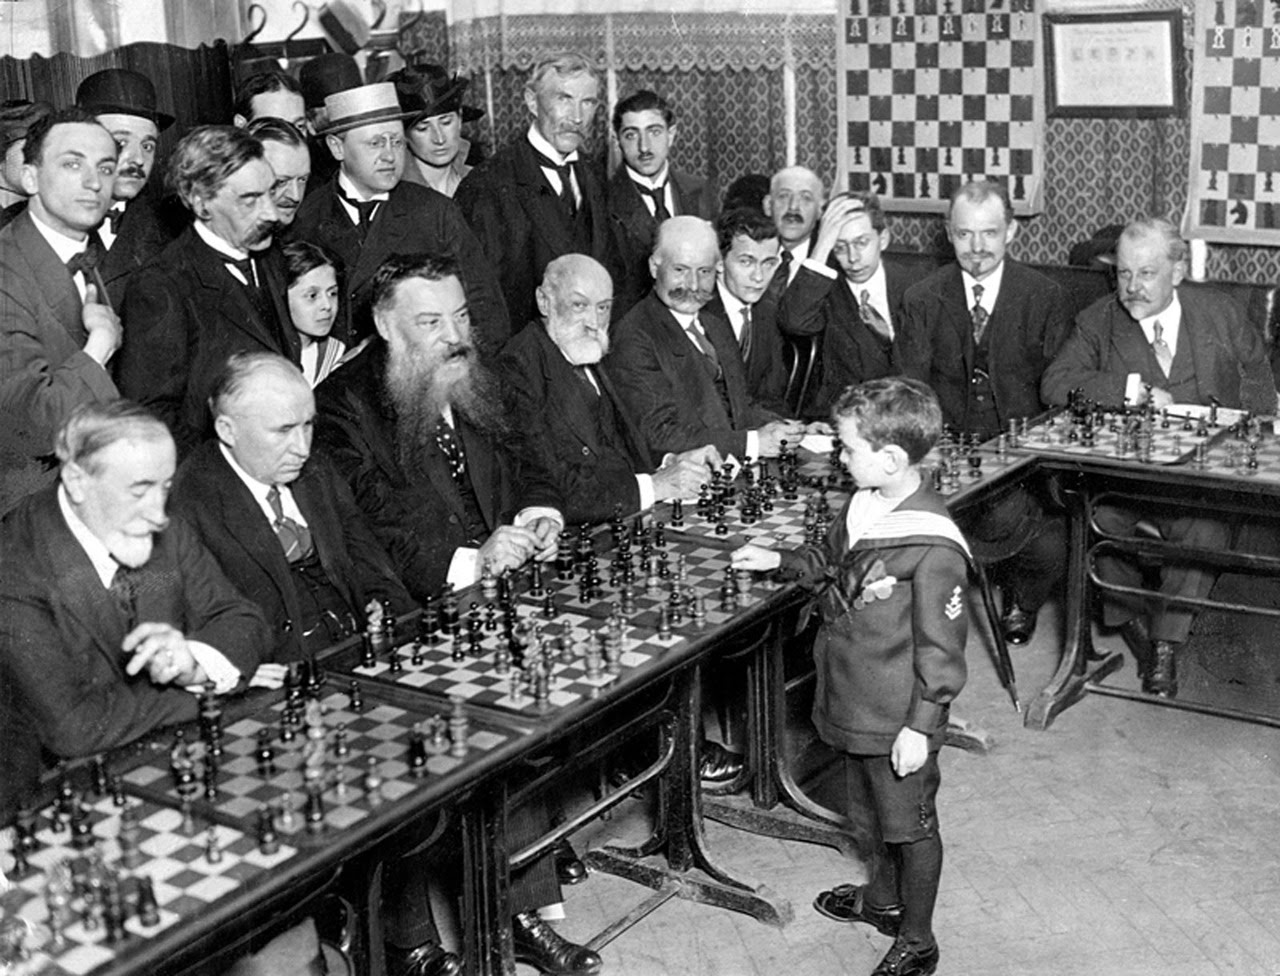 Samuel Reshevsky, age 8, defeating several chess masters at once in France, 1920